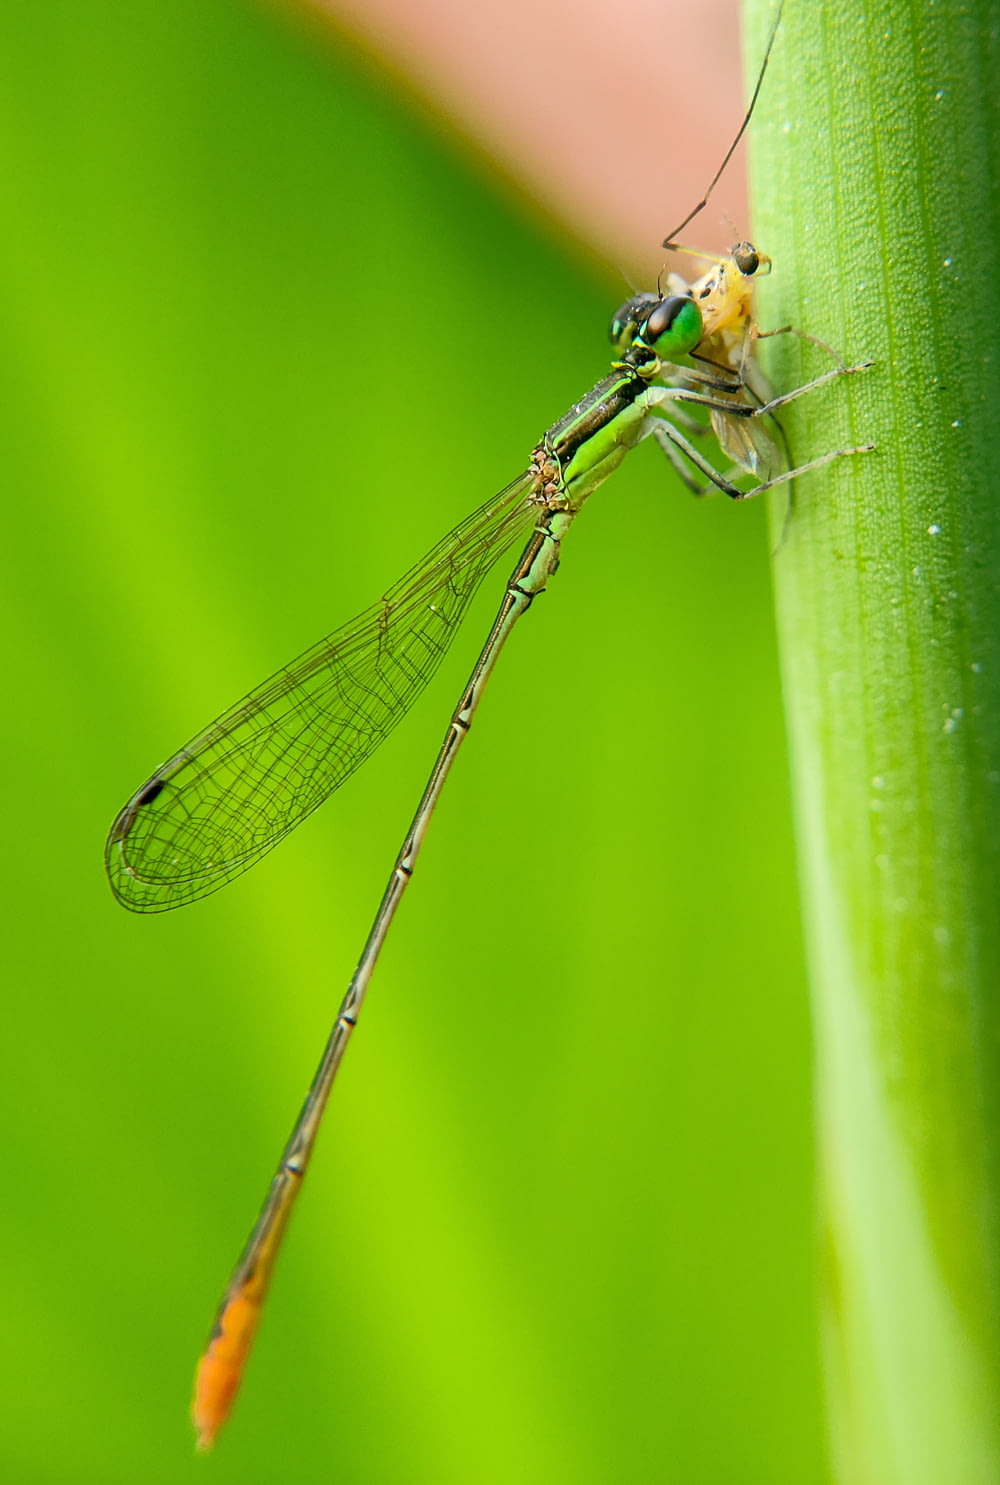 a close up of a dragonfly on a leaf